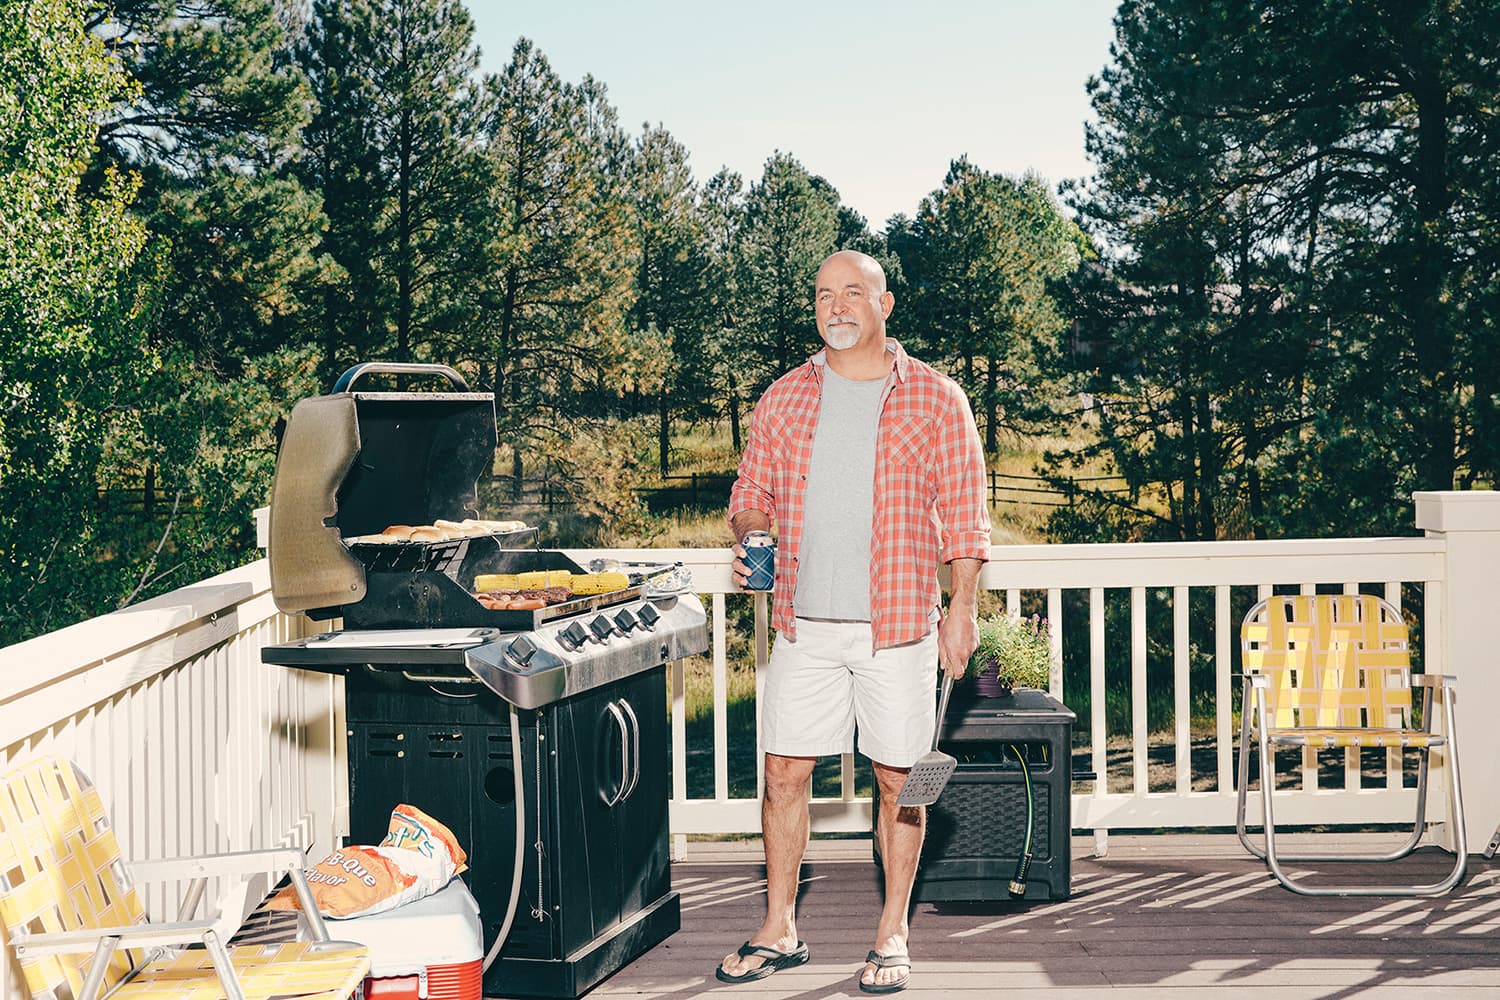 Man standing next to his grill on his deck, holding a beverage